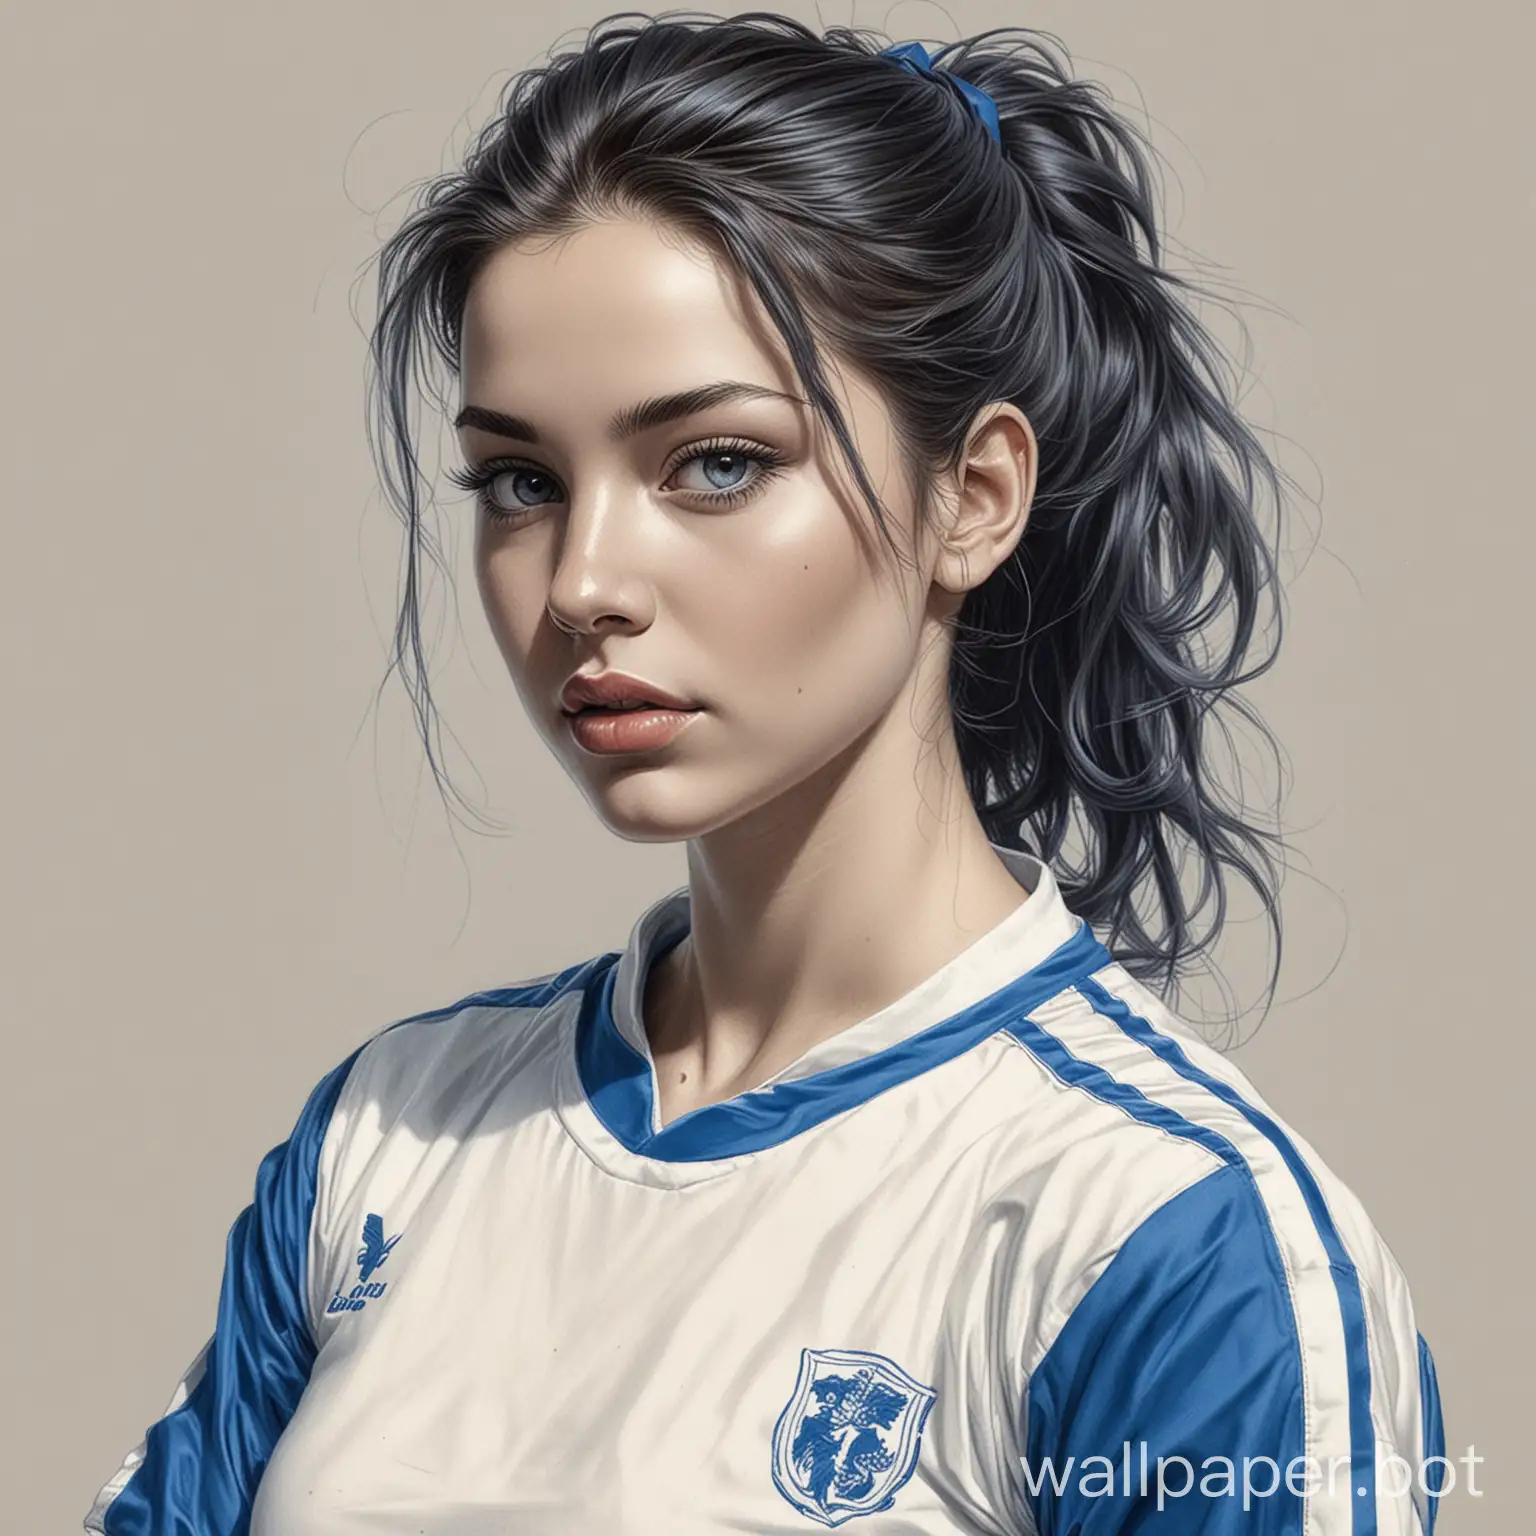 Sketch-of-Lisa-Vittozzi-25-in-Blue-and-White-Soccer-Uniform-on-White-Background-High-Resolution-Pencil-Style